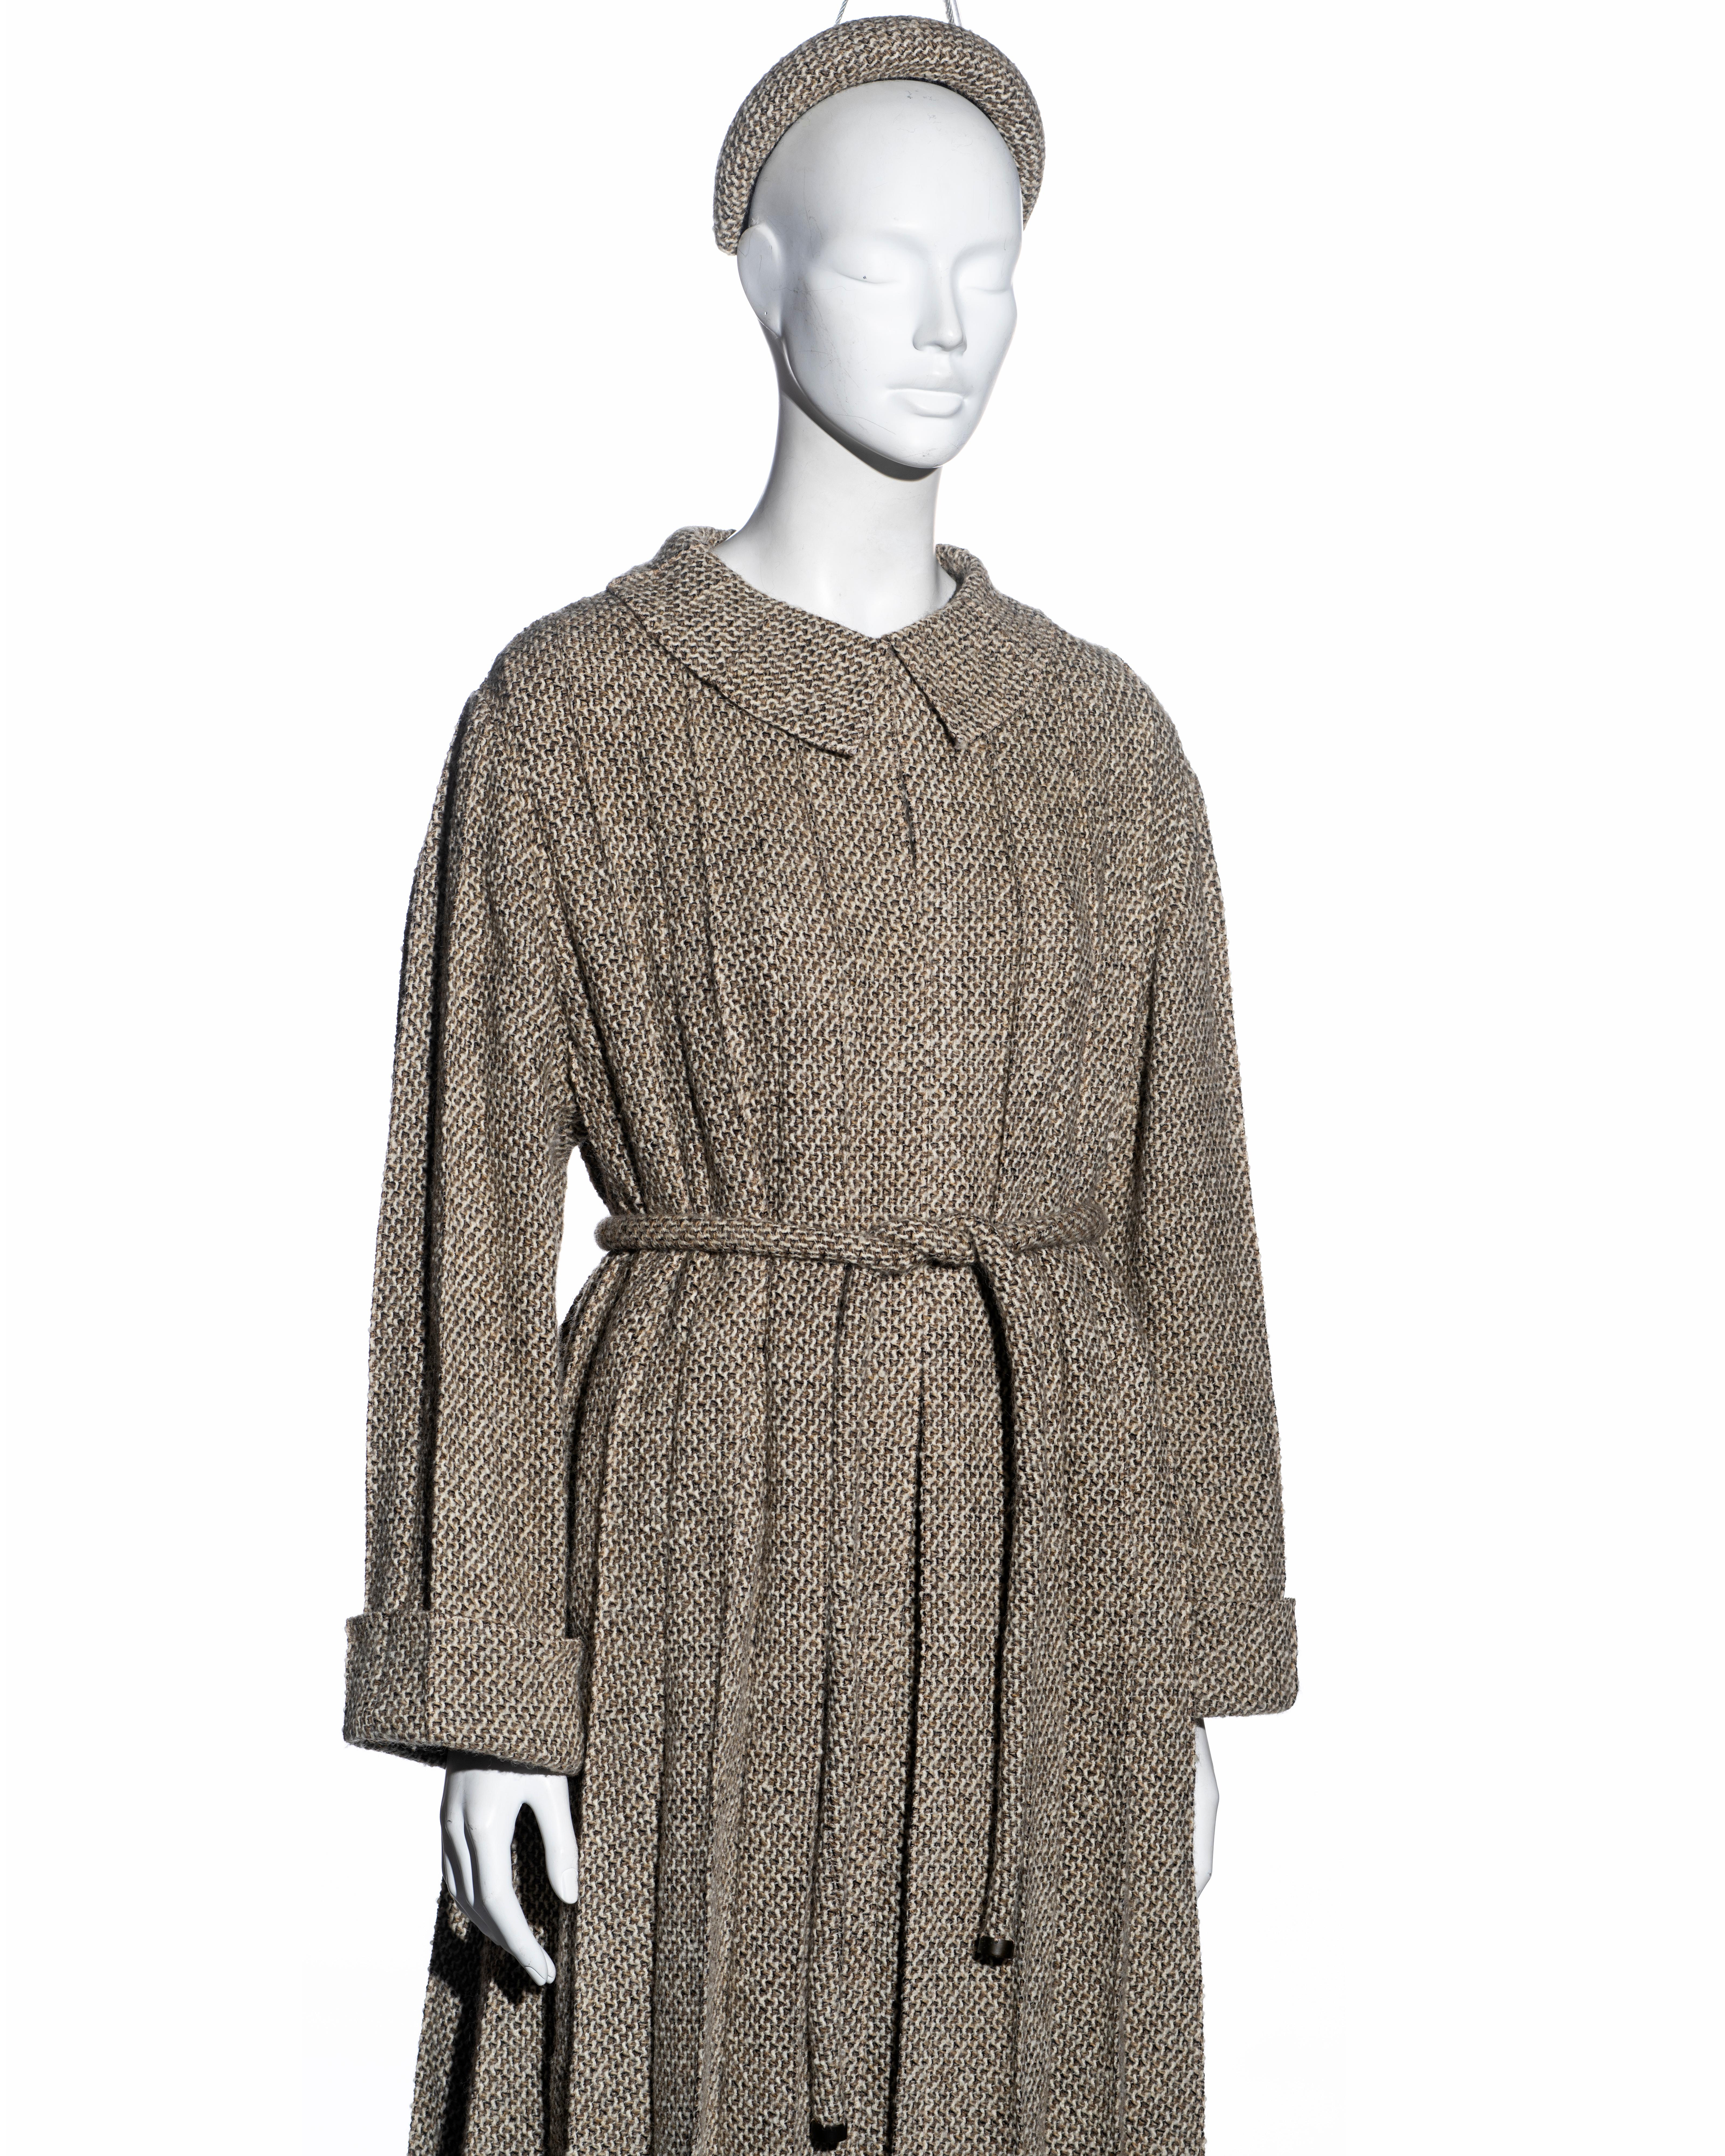 Gray Chanel by Karl Lagerfeld brown tweed pleated coat, skirt and hat set, fw 1998 For Sale